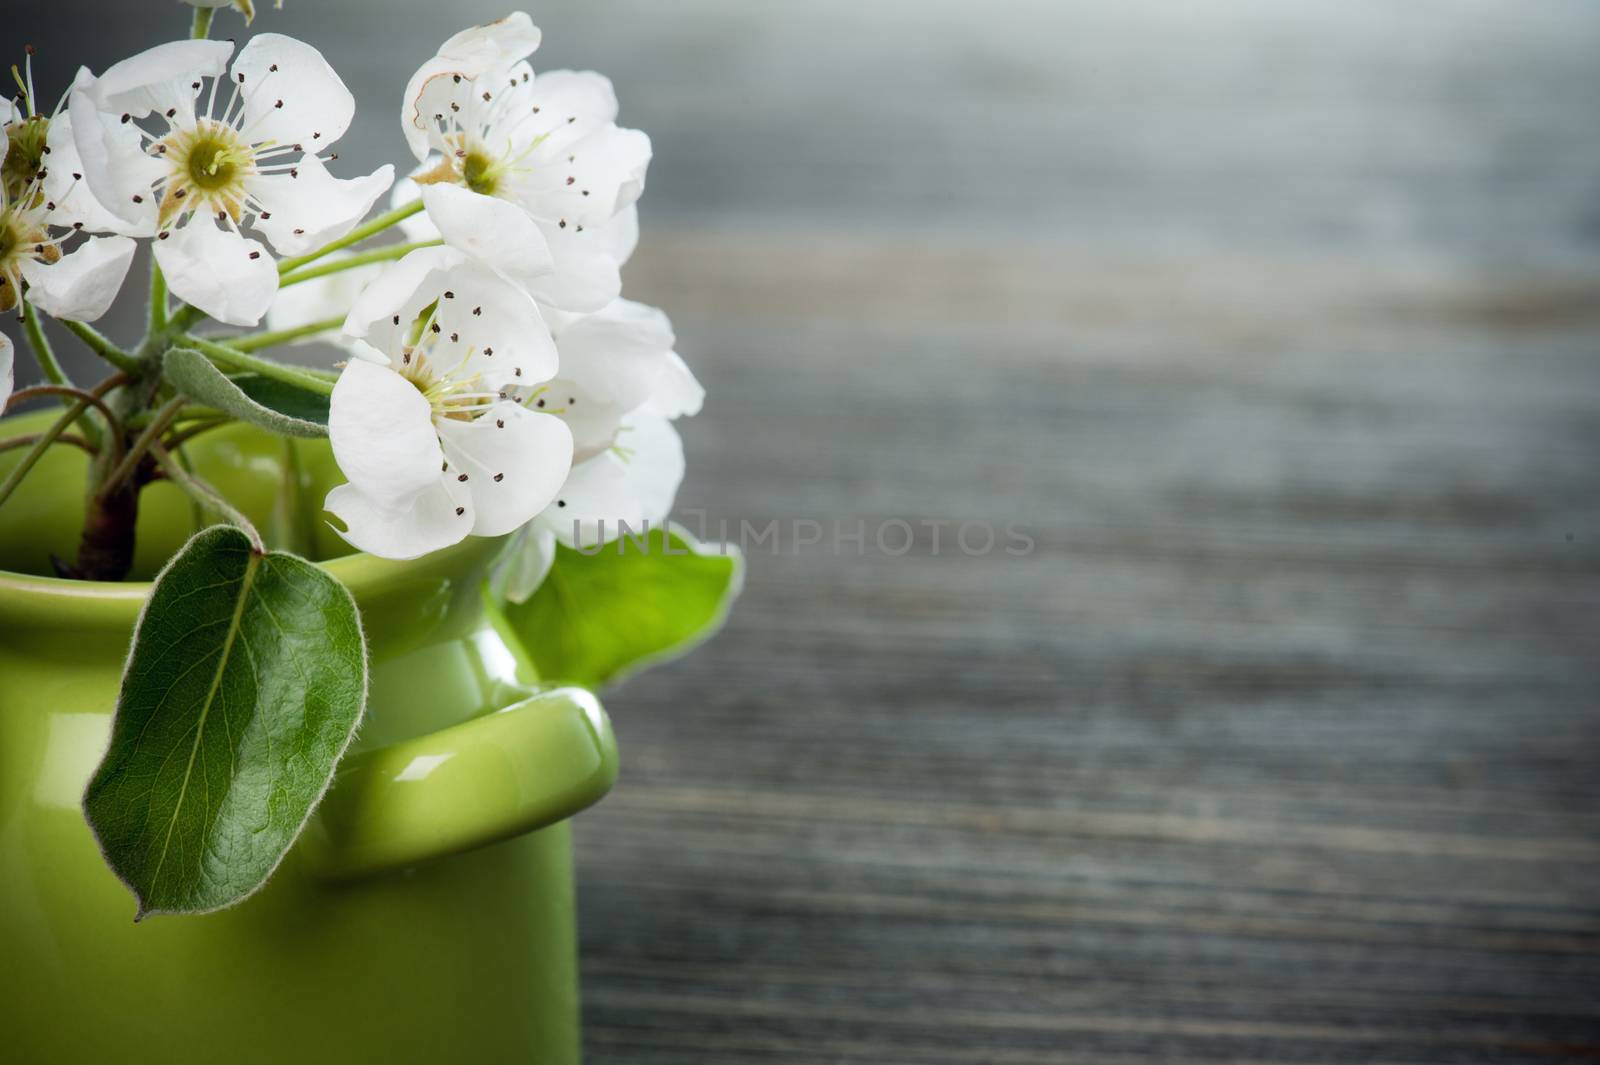 White cherry blossom in a green pot on dark wooden background 